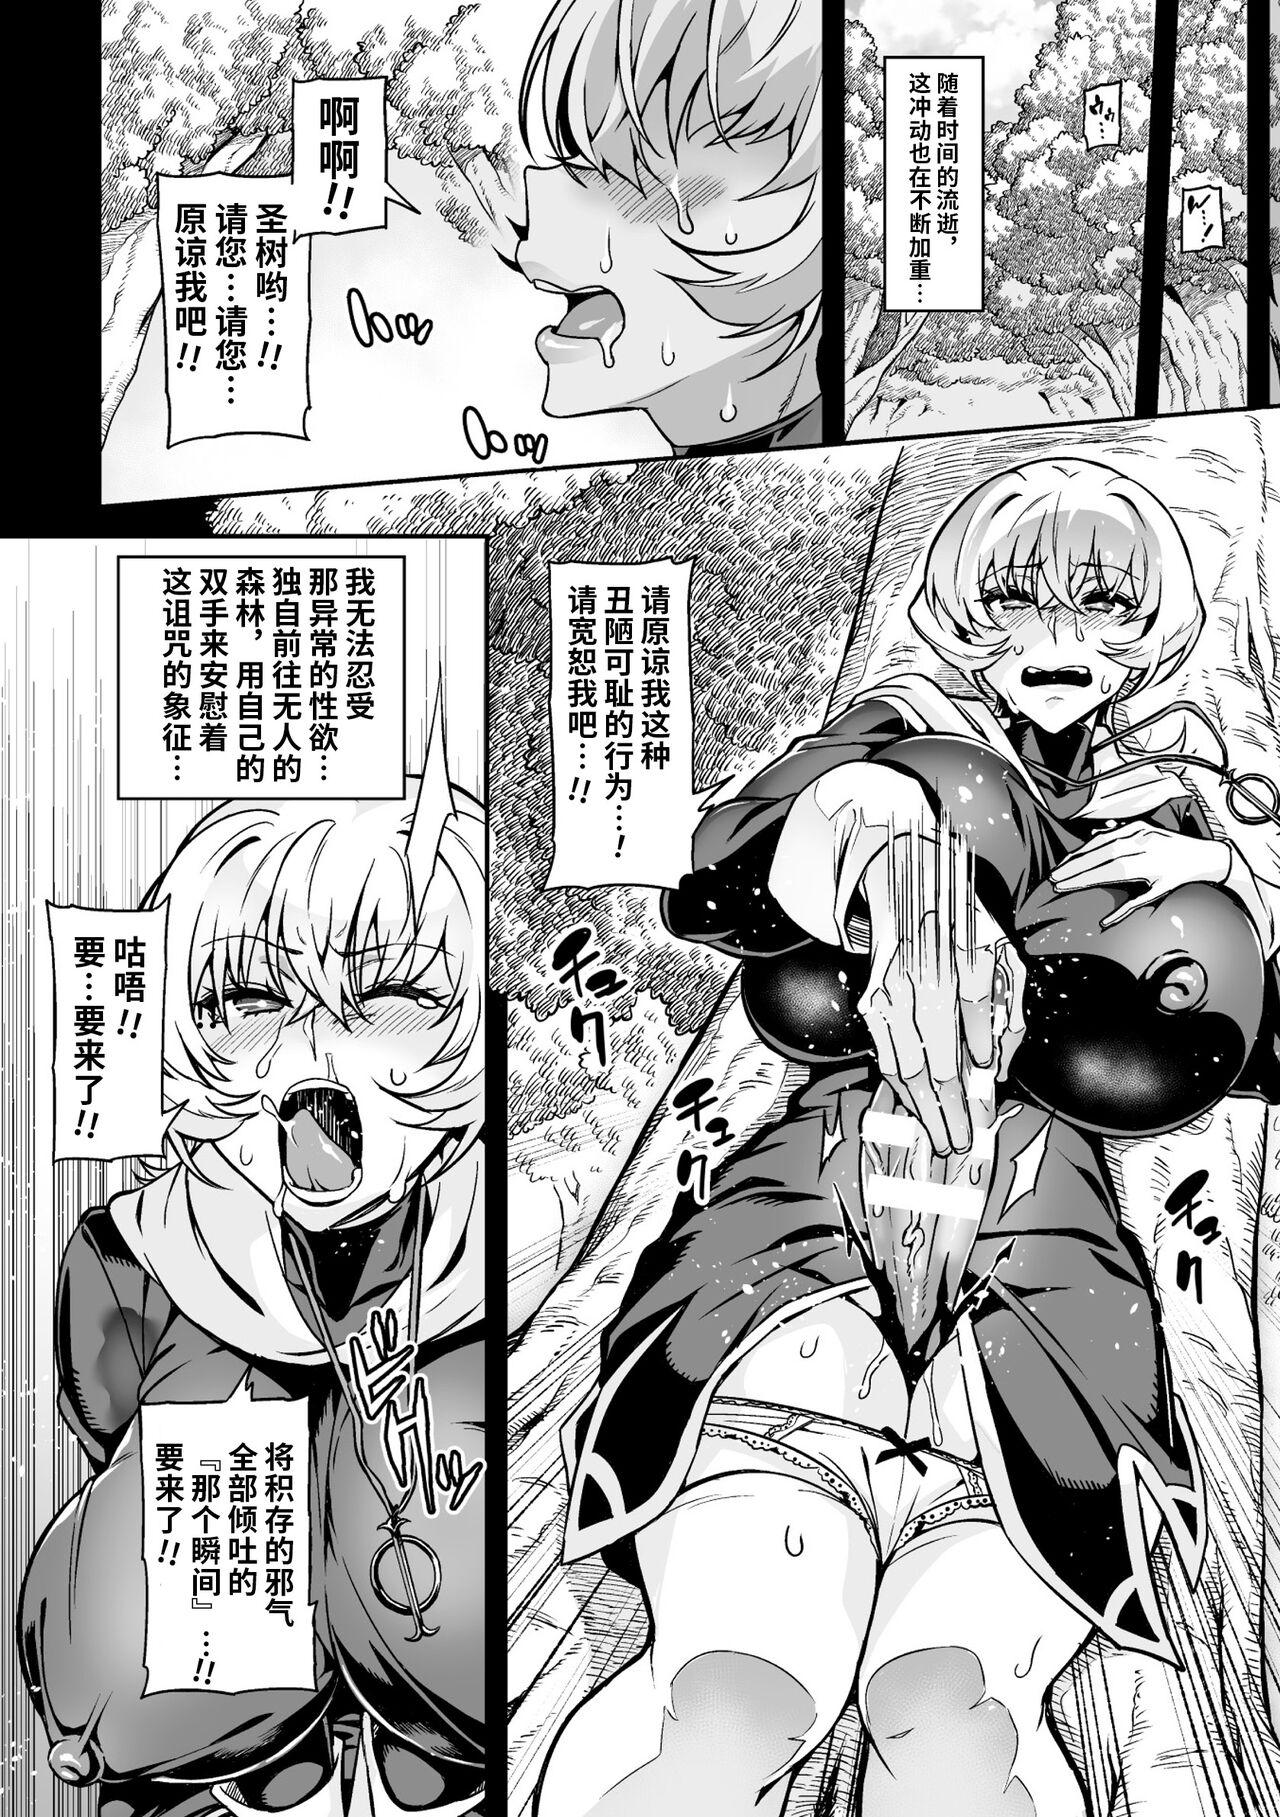 Face Sitting Youkoso! Inma Shoukan Arcadia Ego Ch. 2 Scene - Page 8